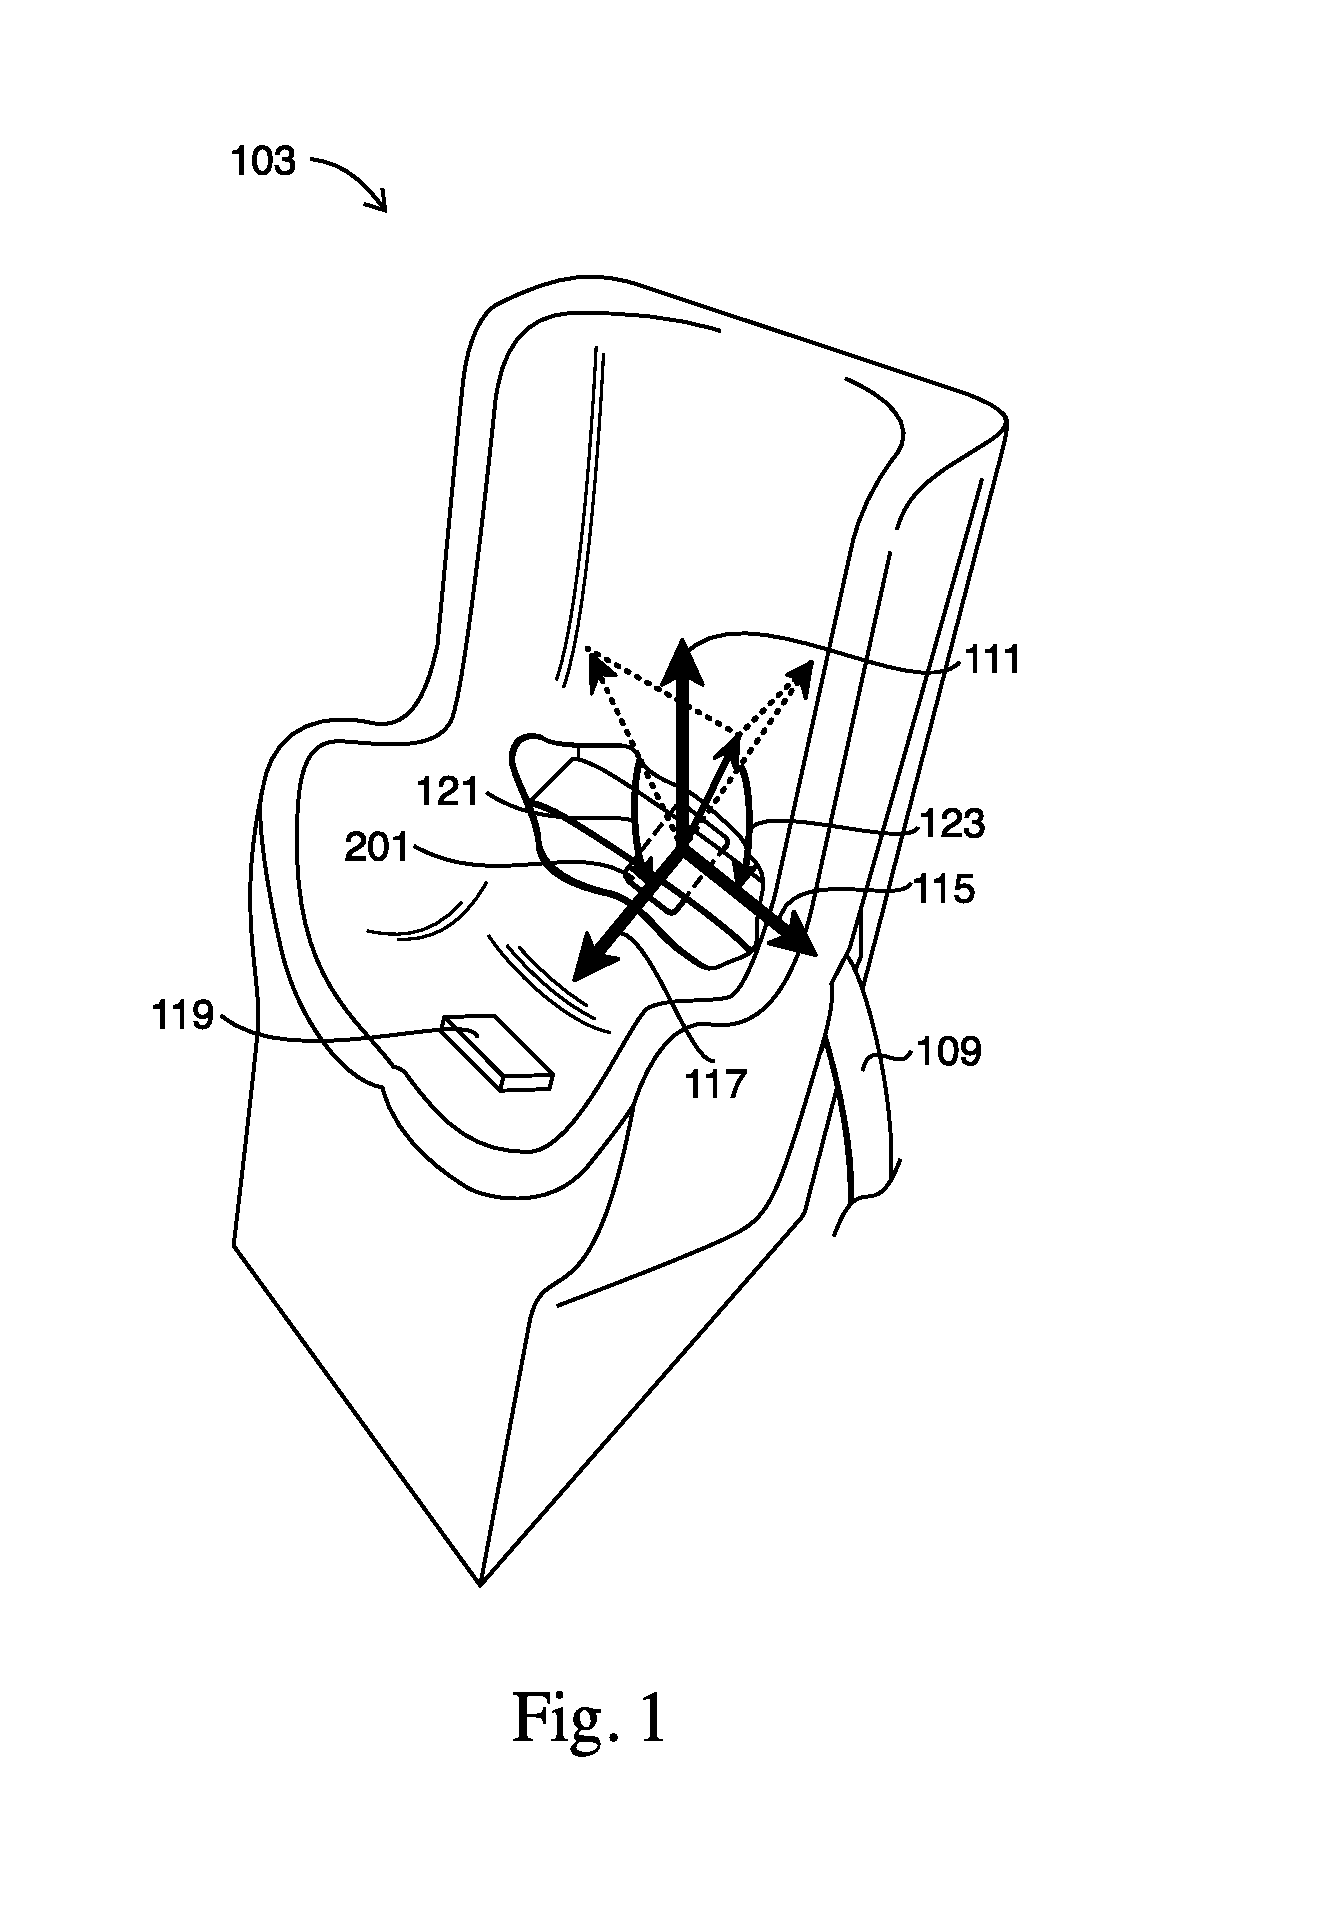 Systems and Methods for Notifying a Caregiver of the Condition of a Child in a Vehicular Child Safety Restraint